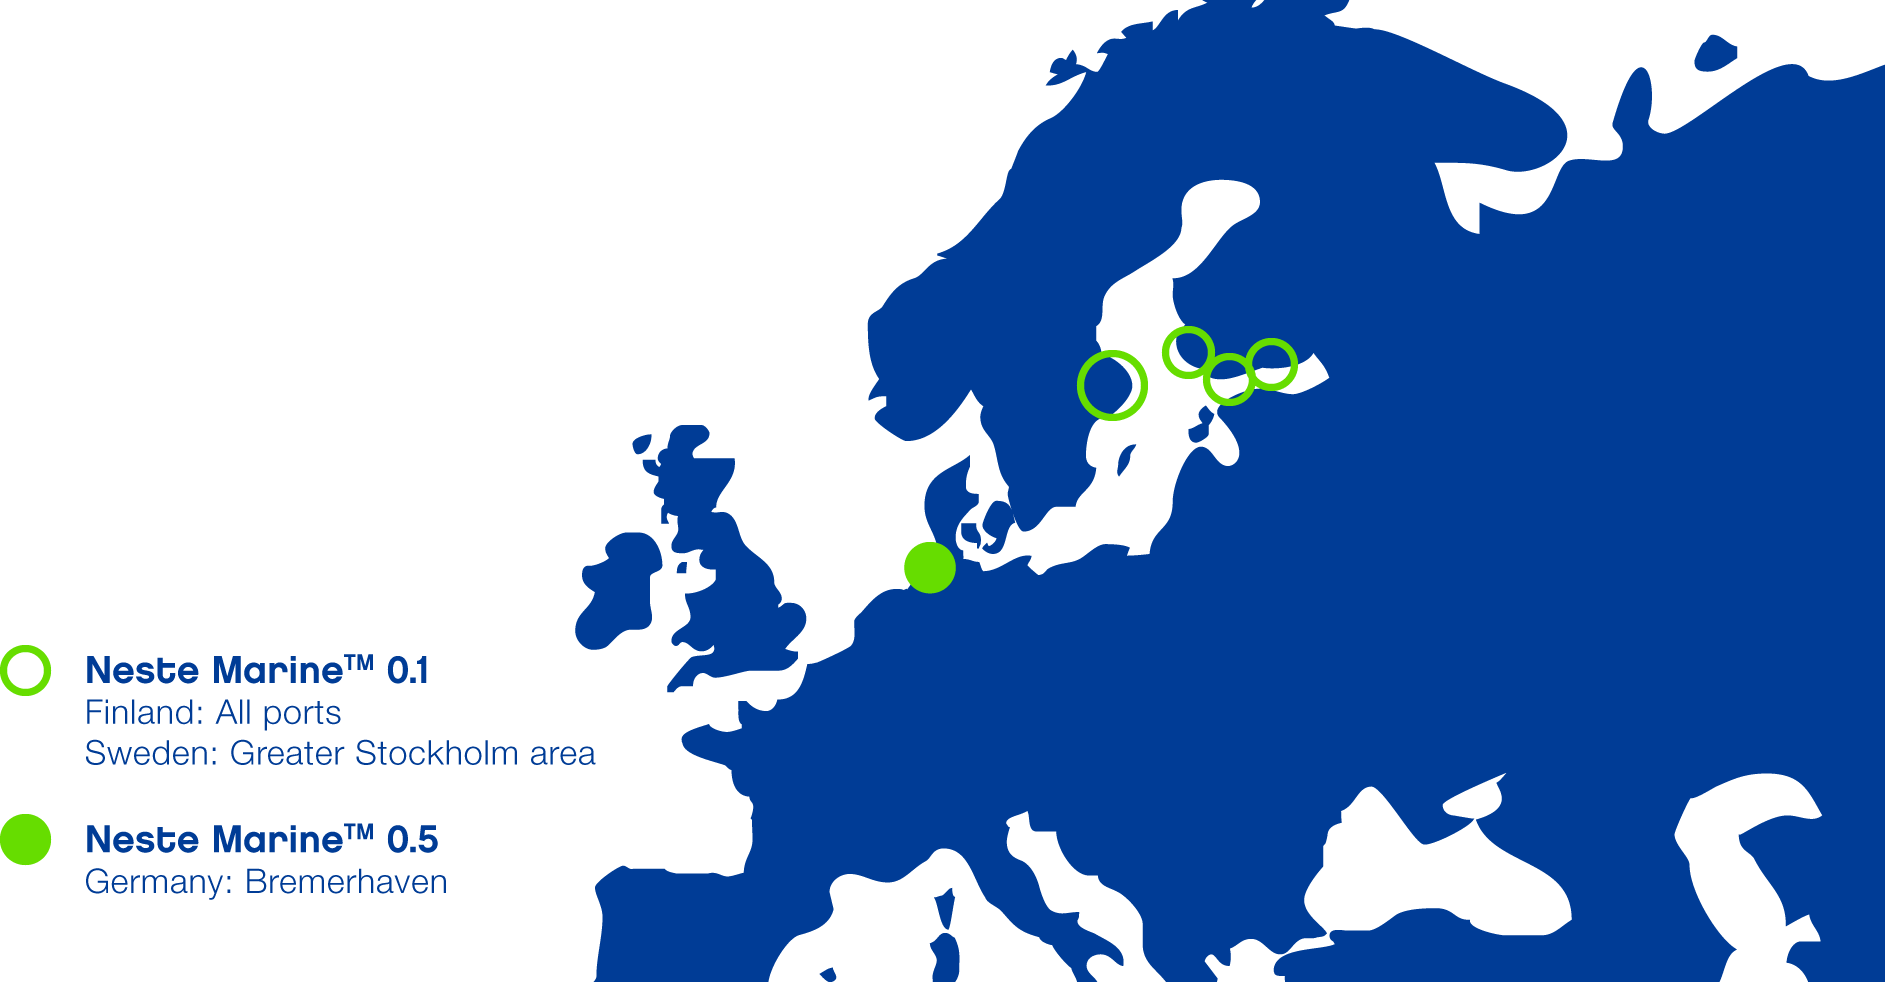 Map of Europe pinpointing locations where Neste marine fuels are available